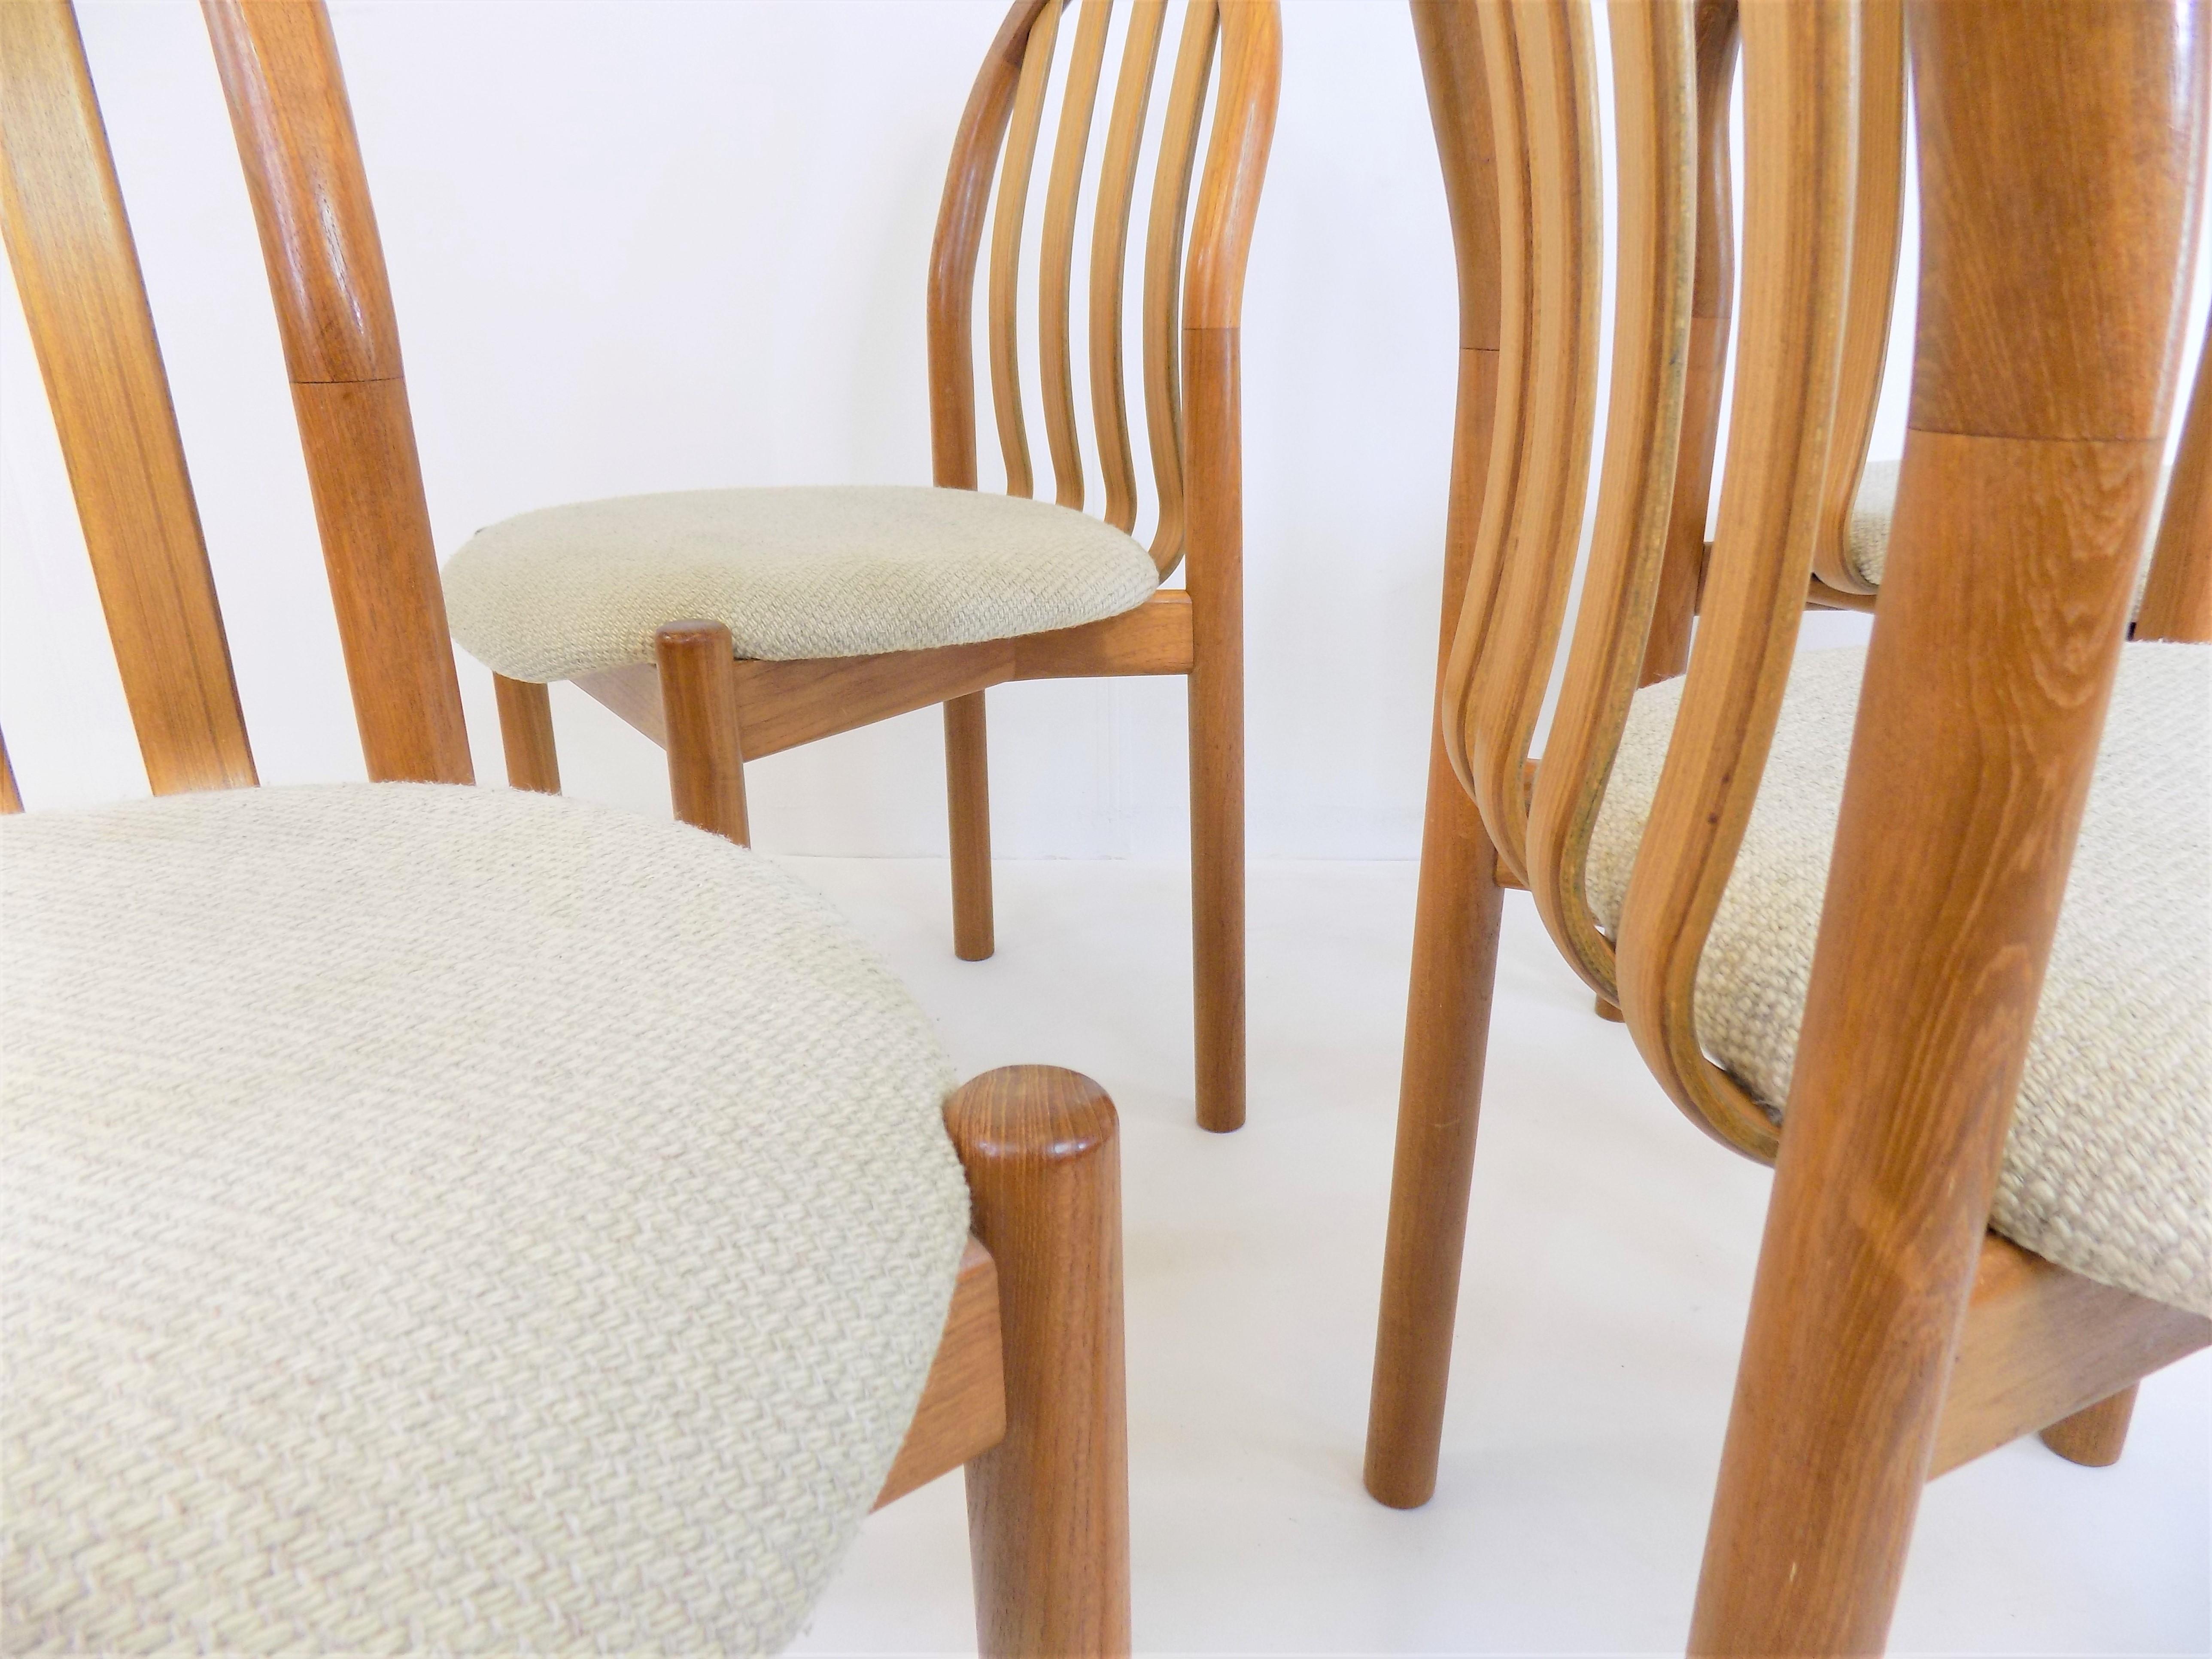 Koefoeds Hornslet Set of 4 Teak Dining Chairs Ole by Niels Koefoed In Good Condition For Sale In Ludwigslust, DE